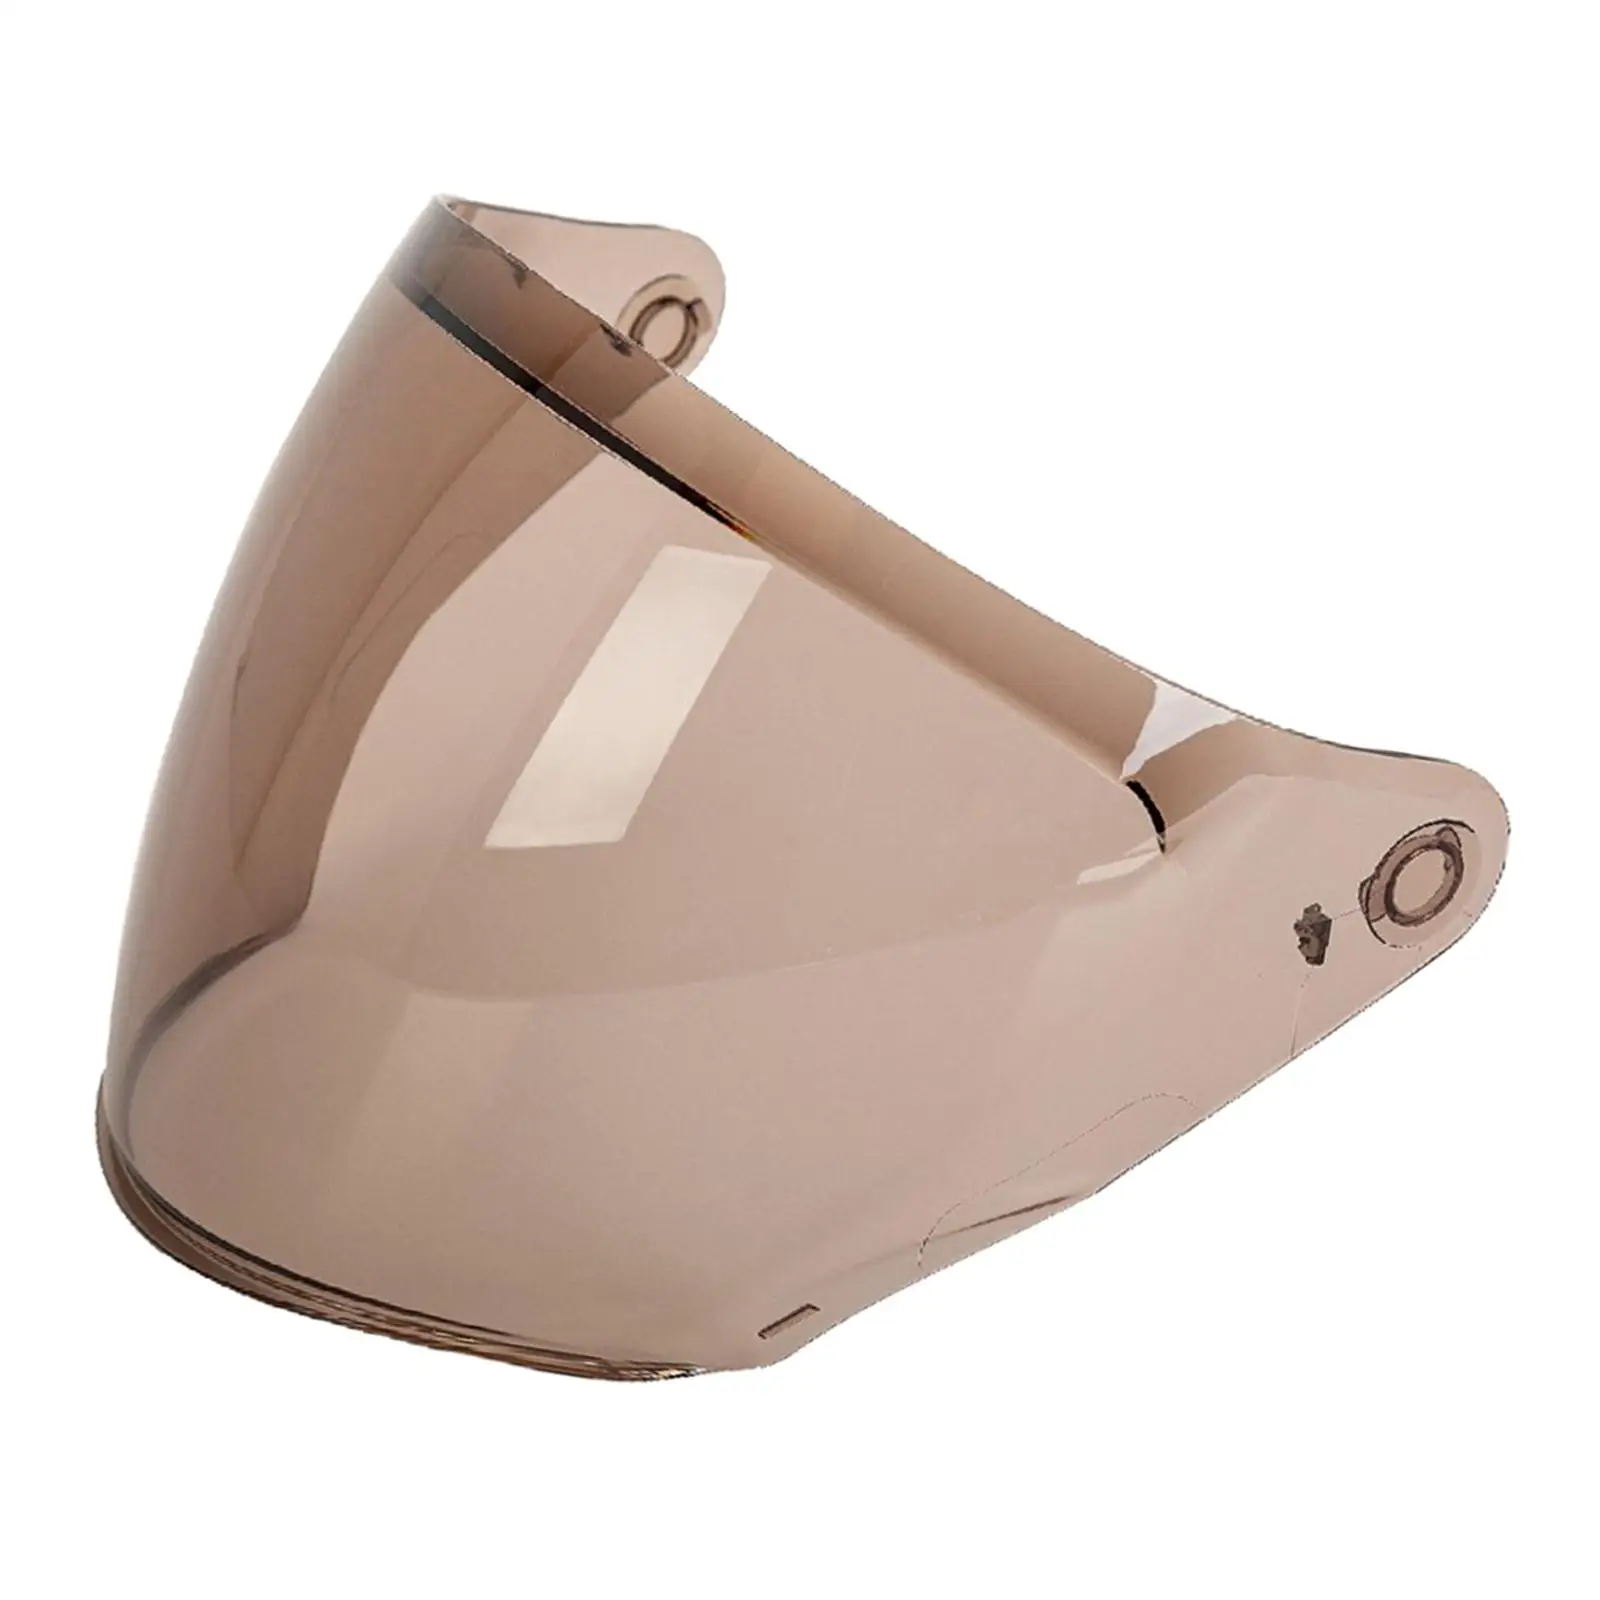 Open Face  Visor Wind Shield Lens Accessories Parts for KYT NFJ Advanced manufacturing technology